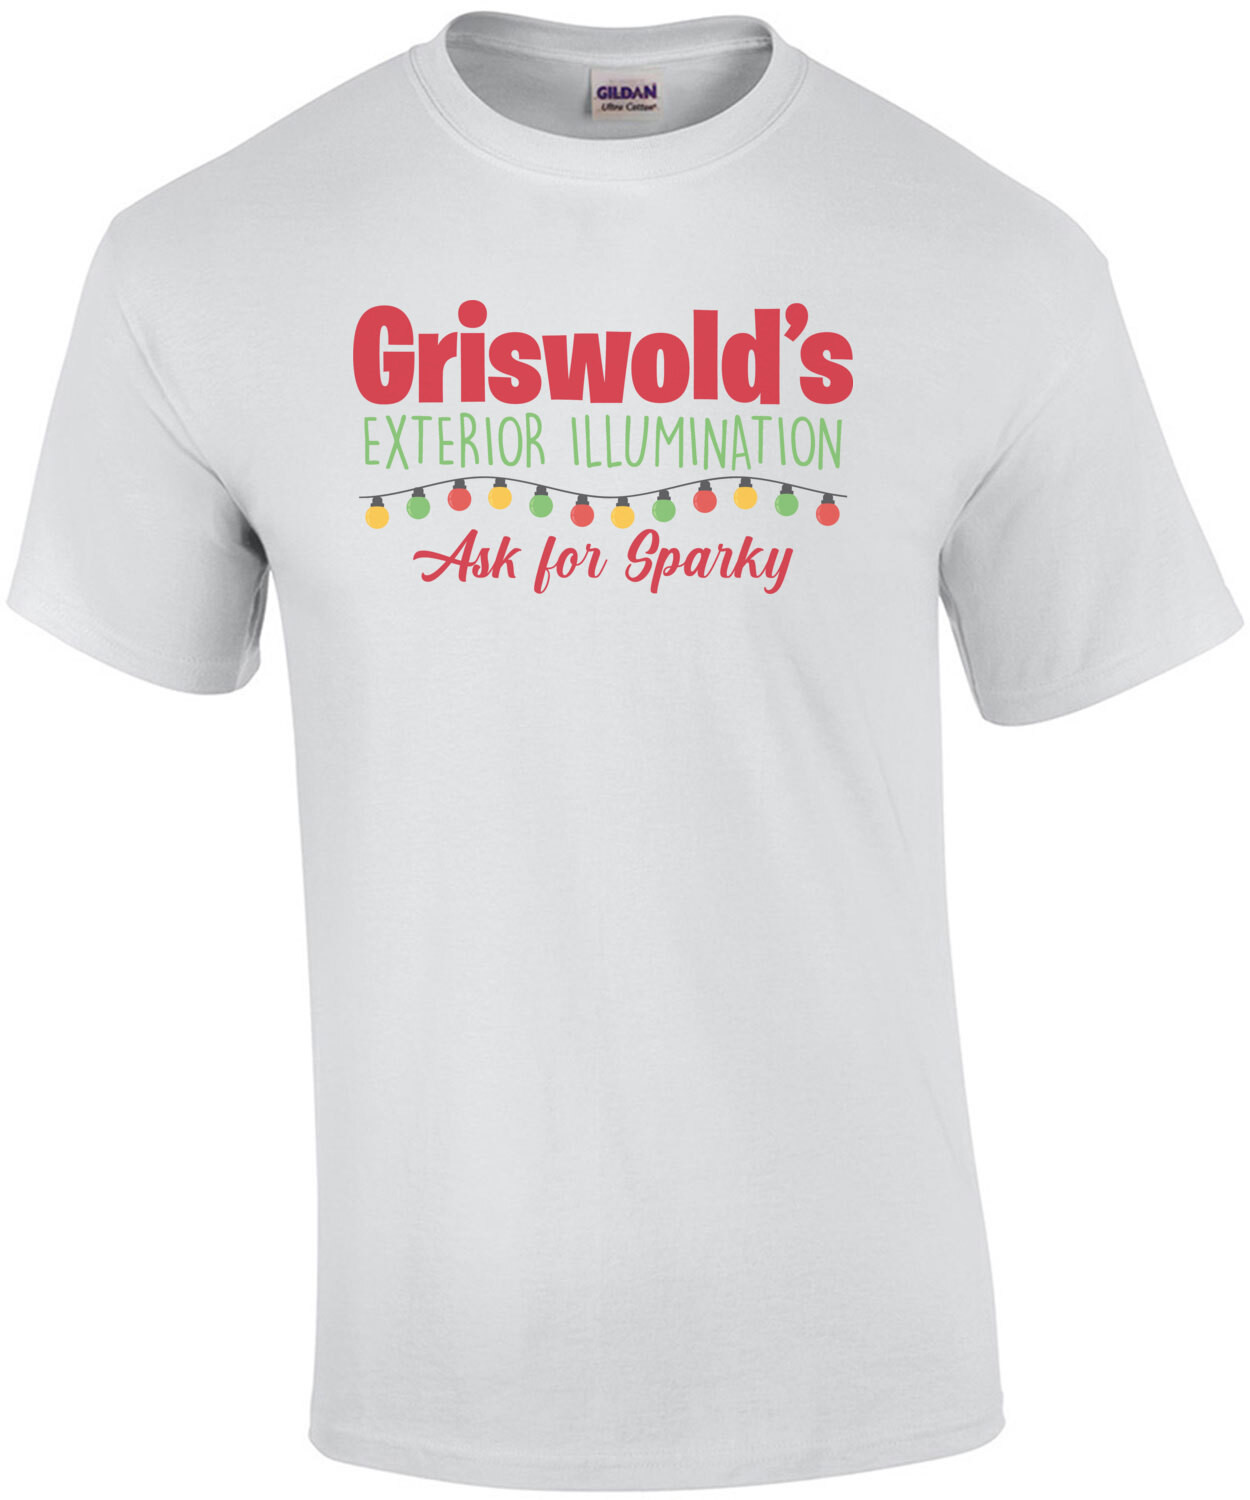 Griswold's Exterior Illumination - Ask For Sparky - Funny Christmas T-Shirt